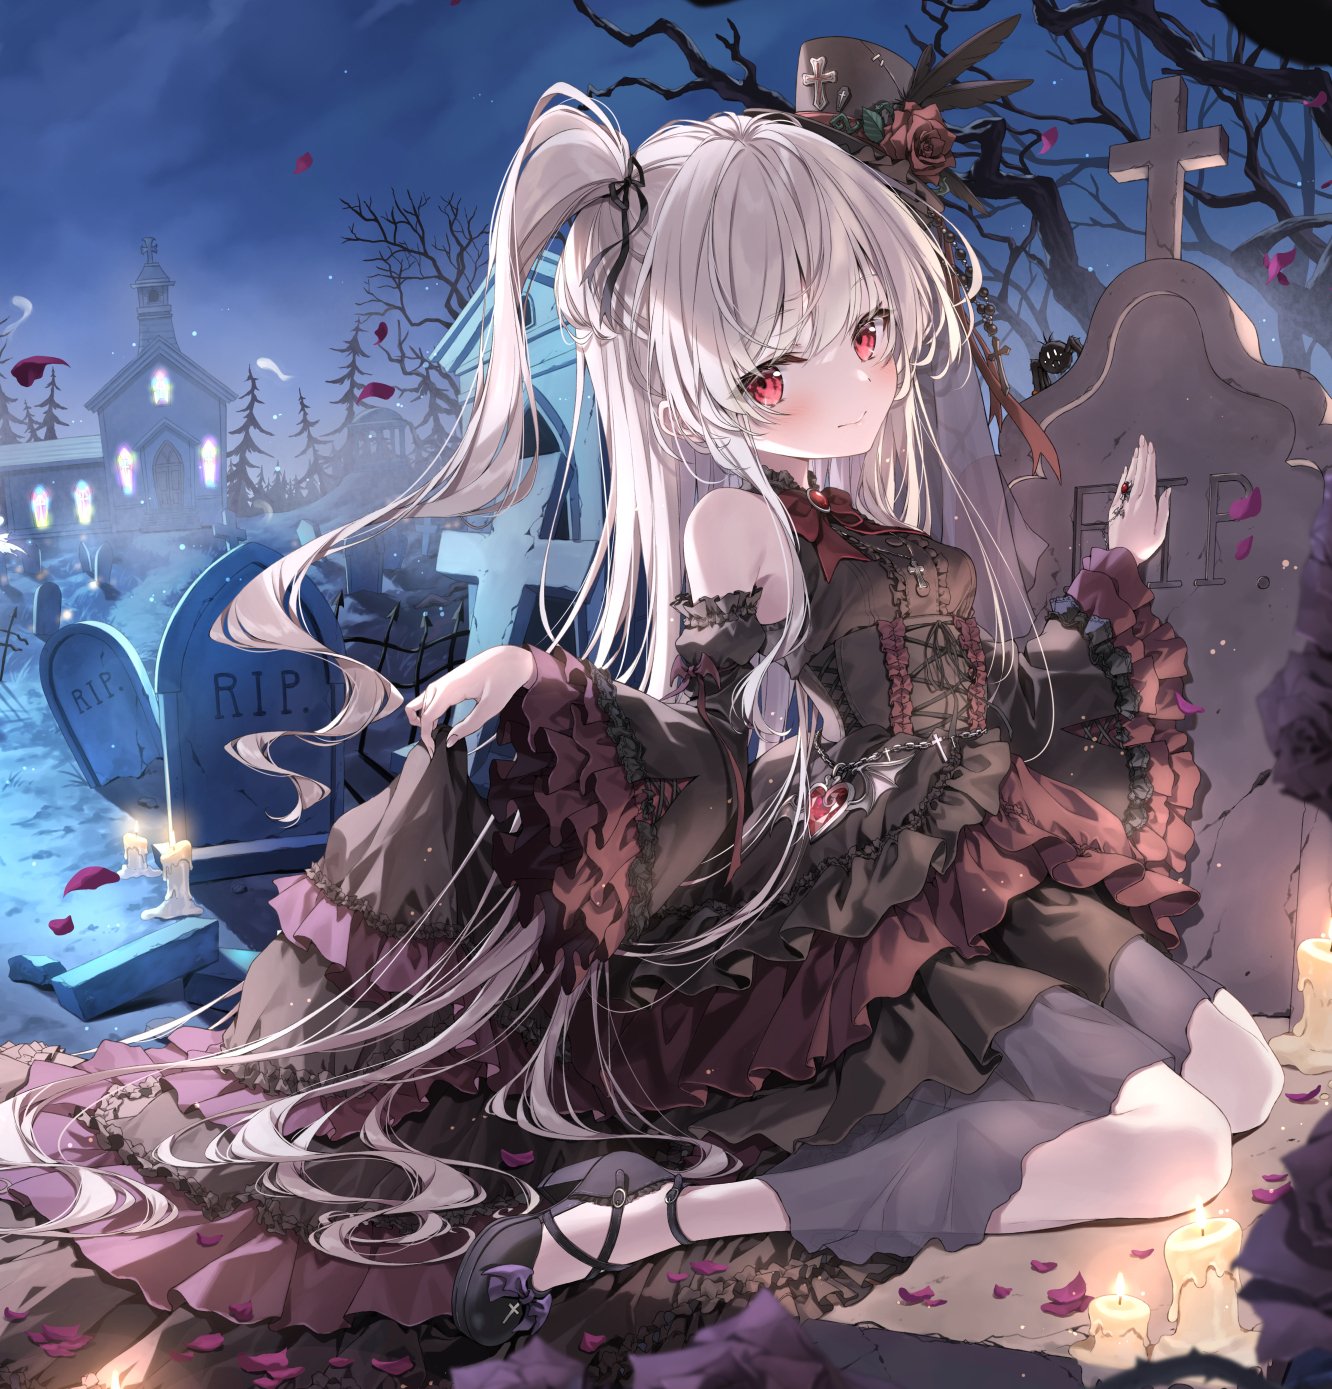 K Project, White Hair, Fractals, Boku No Hero Academia, - Anime Girl With  Silver Hair And Red Eyes Transparent PNG - 490x690 - Free Download on  NicePNG